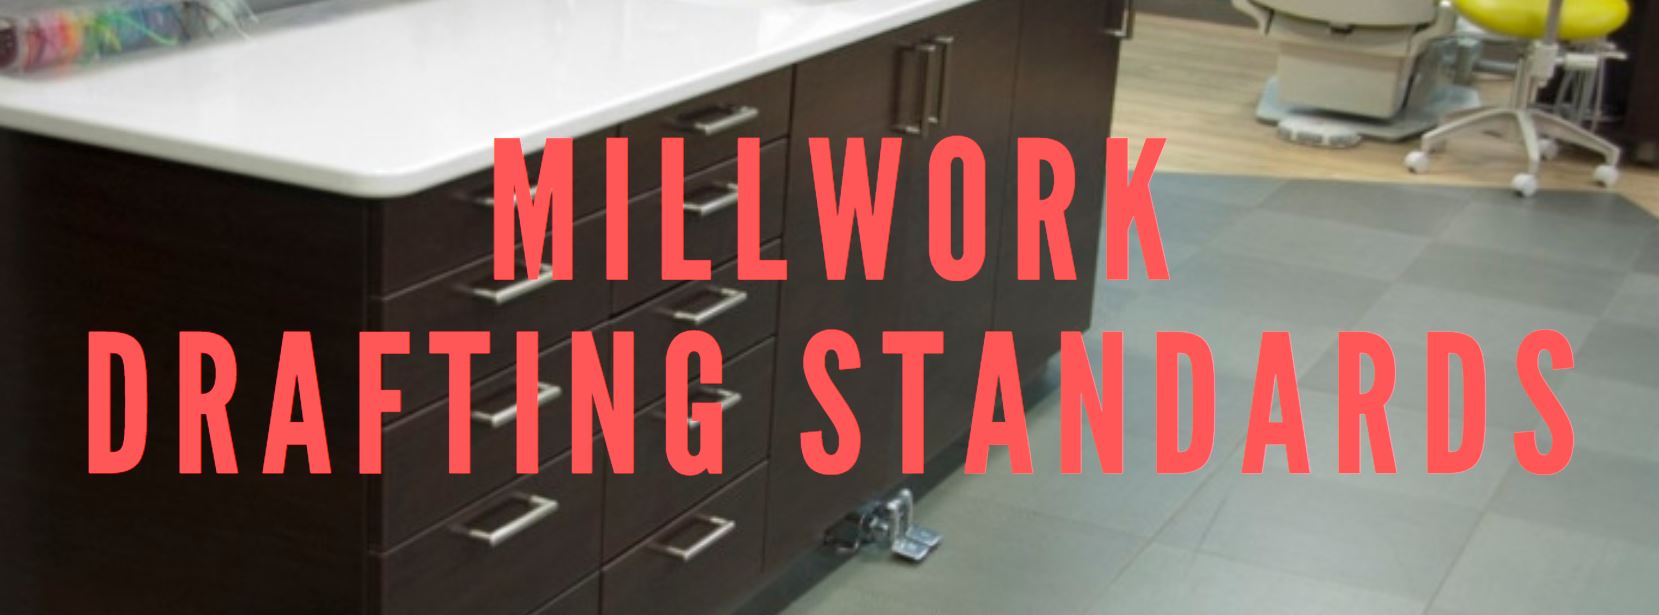 Superior Shop Drawings - Millwork Drafting Standards